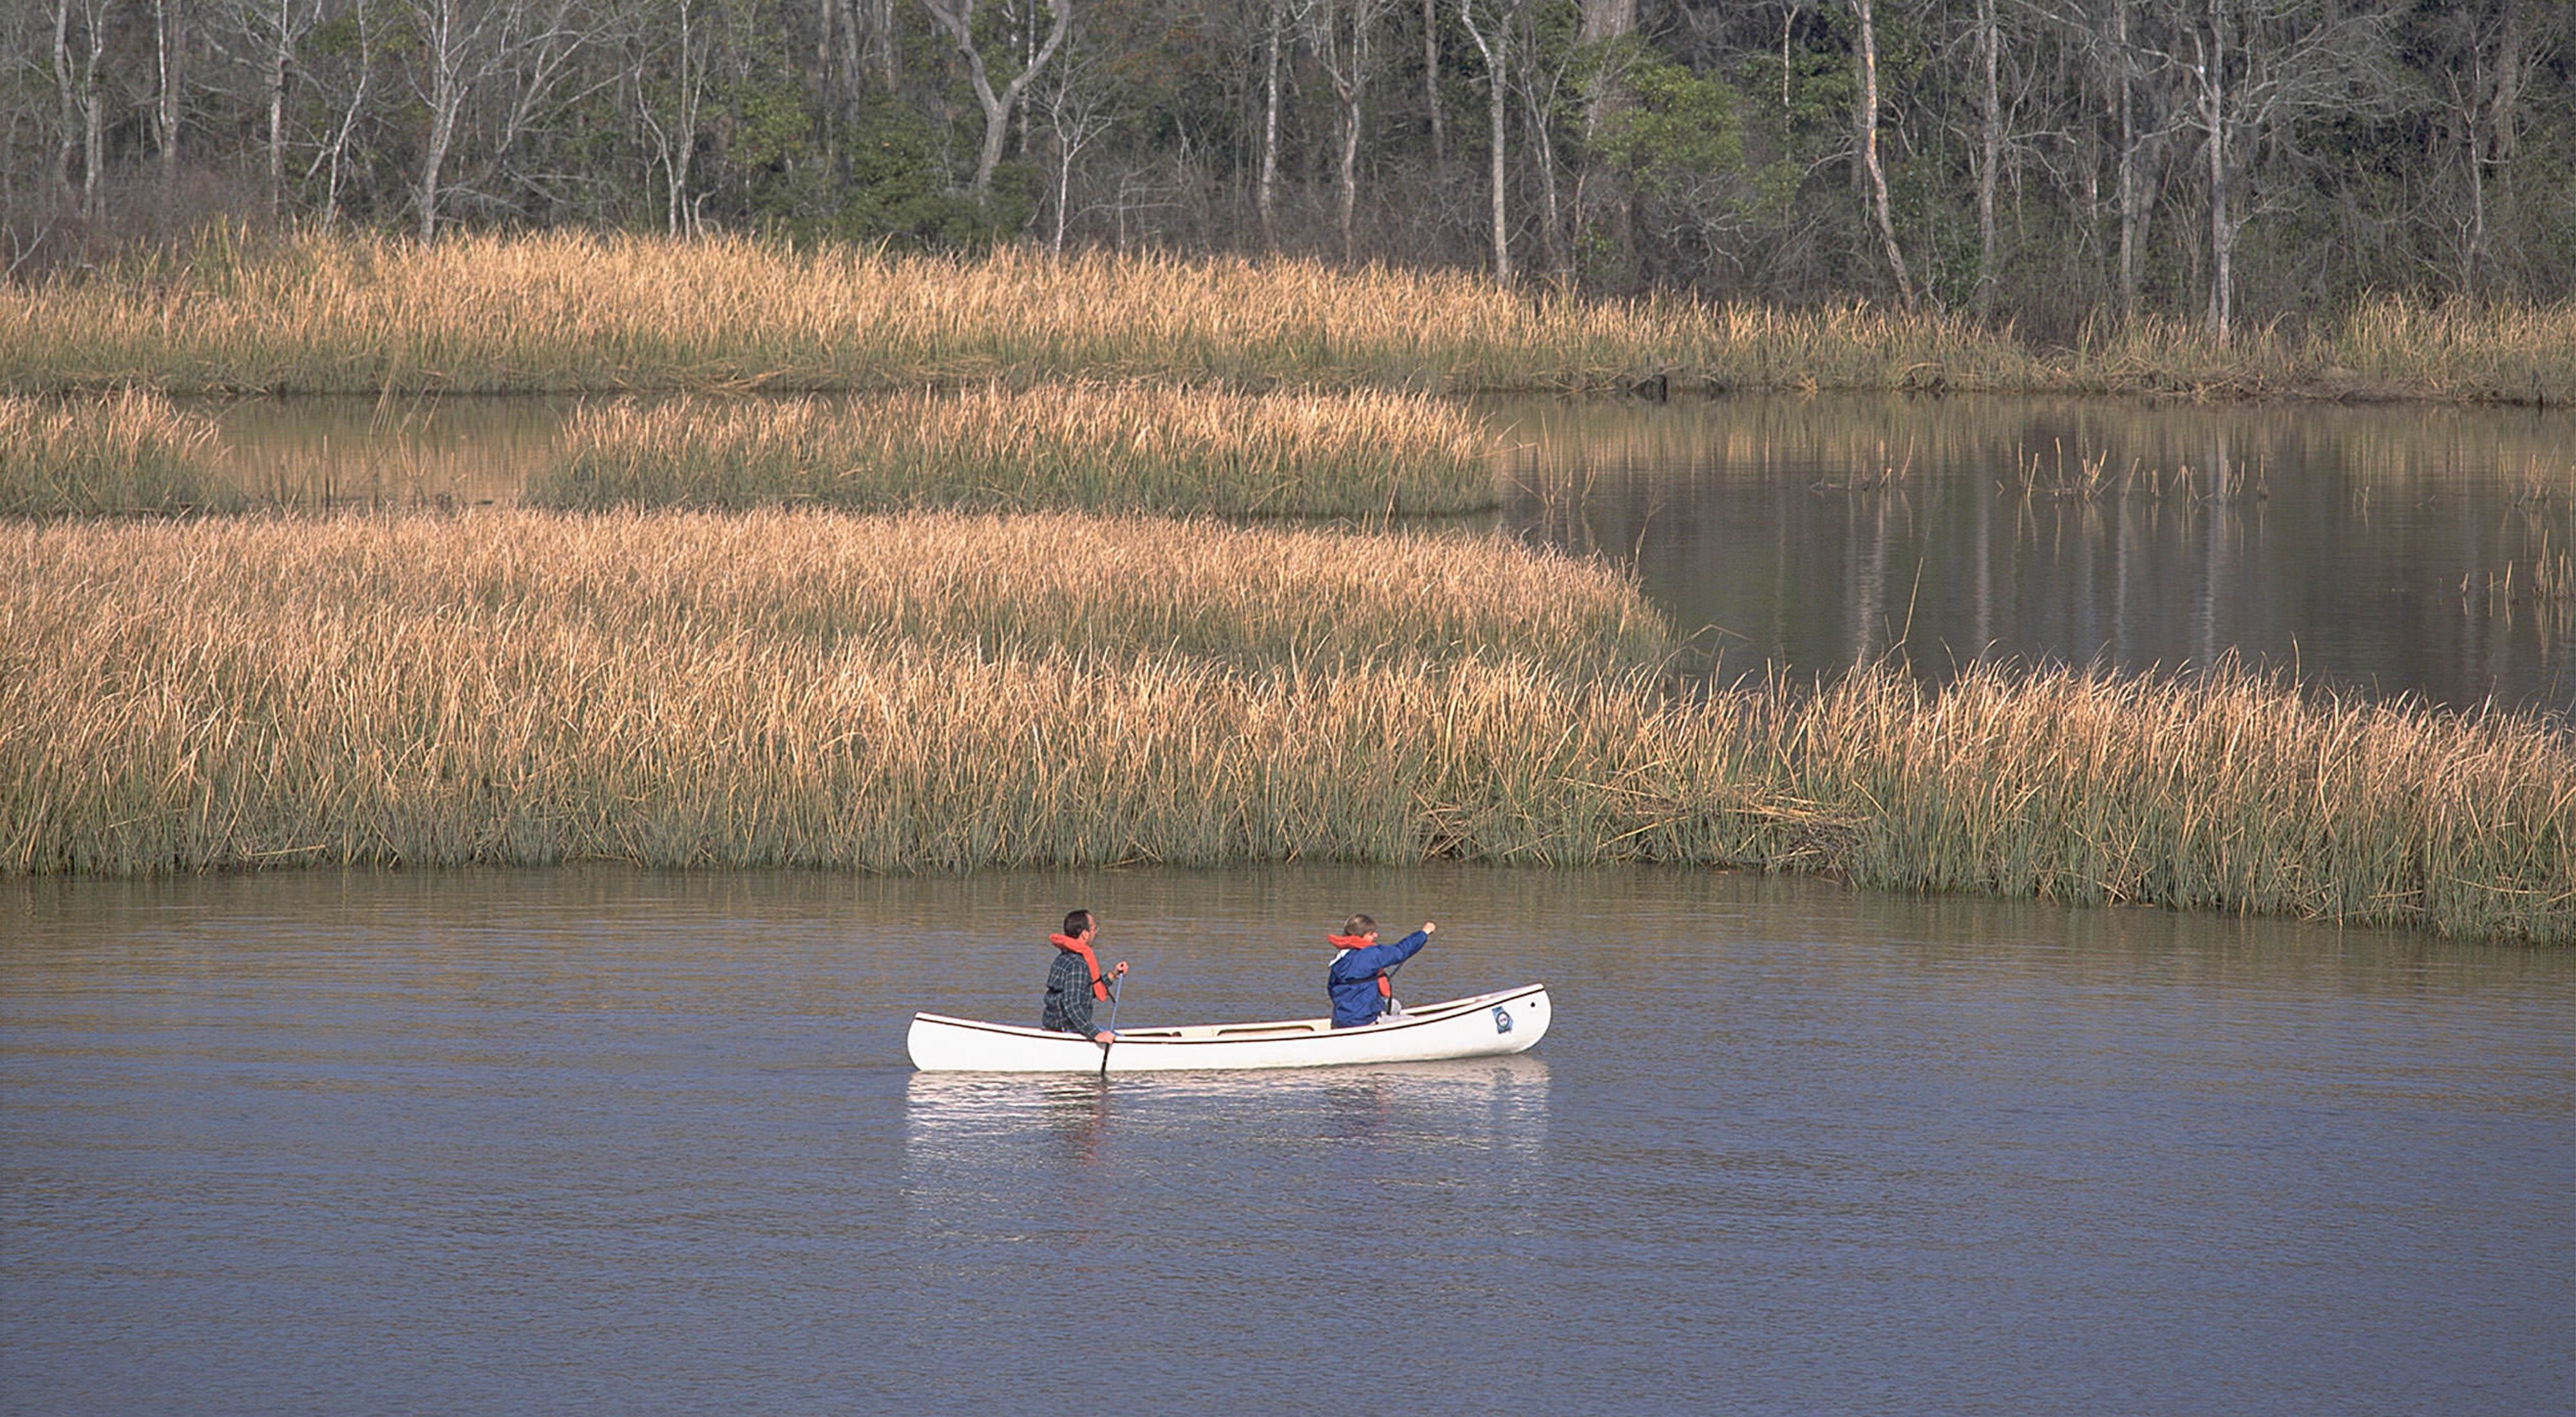 Canoeists on the Altamaha River in Georgia. TNC has protected thousands of acres in the lower Altamaha River watershed in partnership with many agencies and organizations.